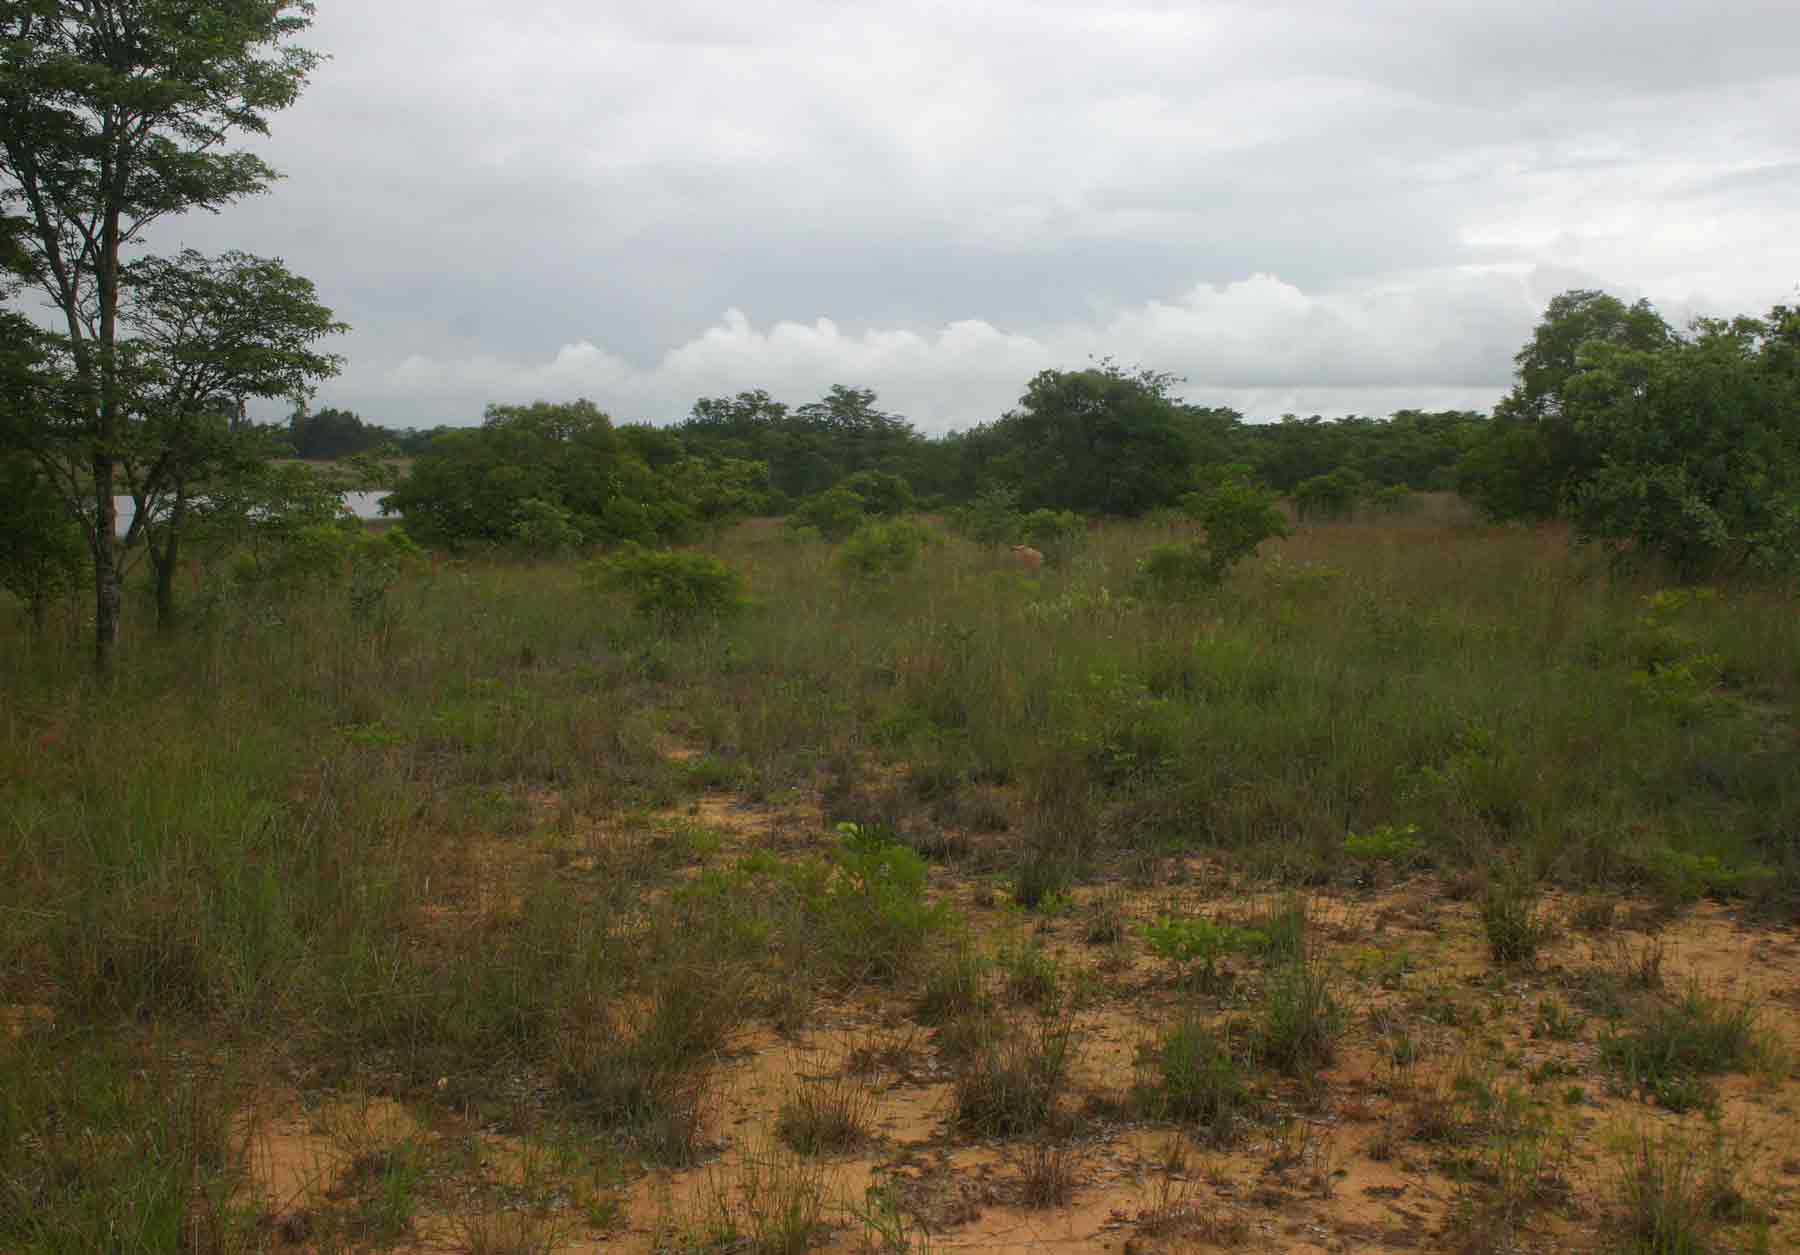 Open area, partly poor sandy soils and partly grassy vleis